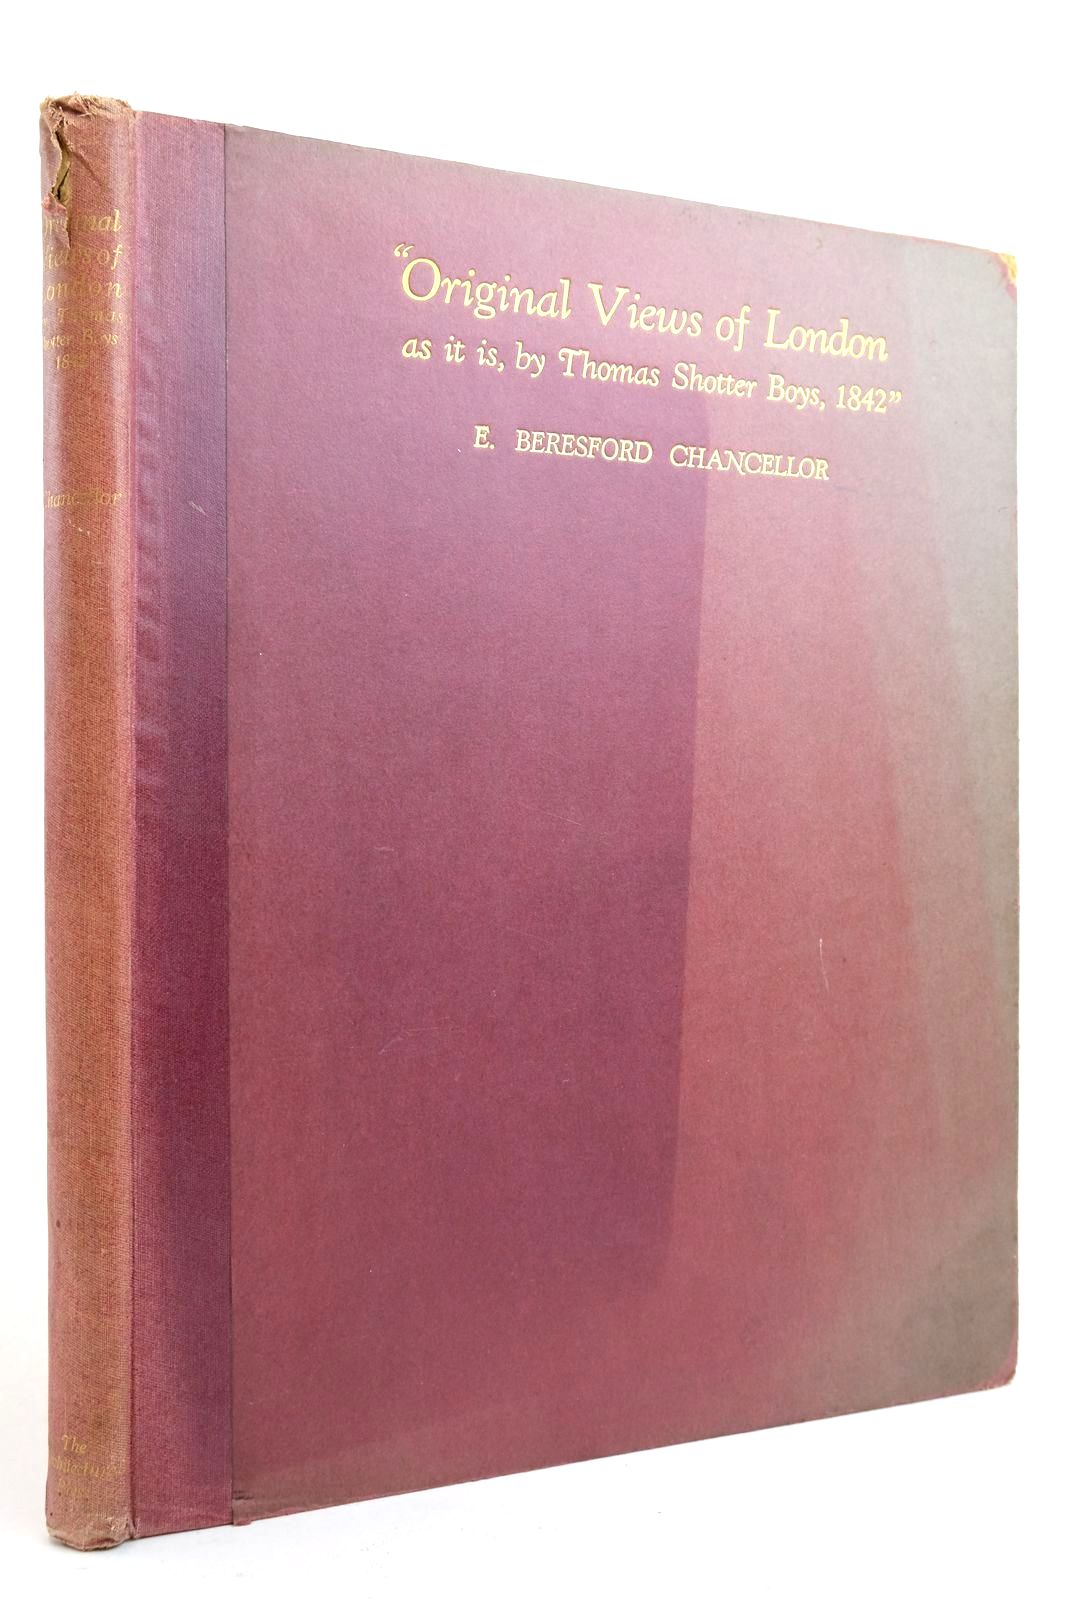 Photo of ORIGINAL VIEWS OF LONDON written by Chancellor, E. Beresford illustrated by Boys, Thomas Shotter published by The Architectural Press (STOCK CODE: 2134868)  for sale by Stella & Rose's Books